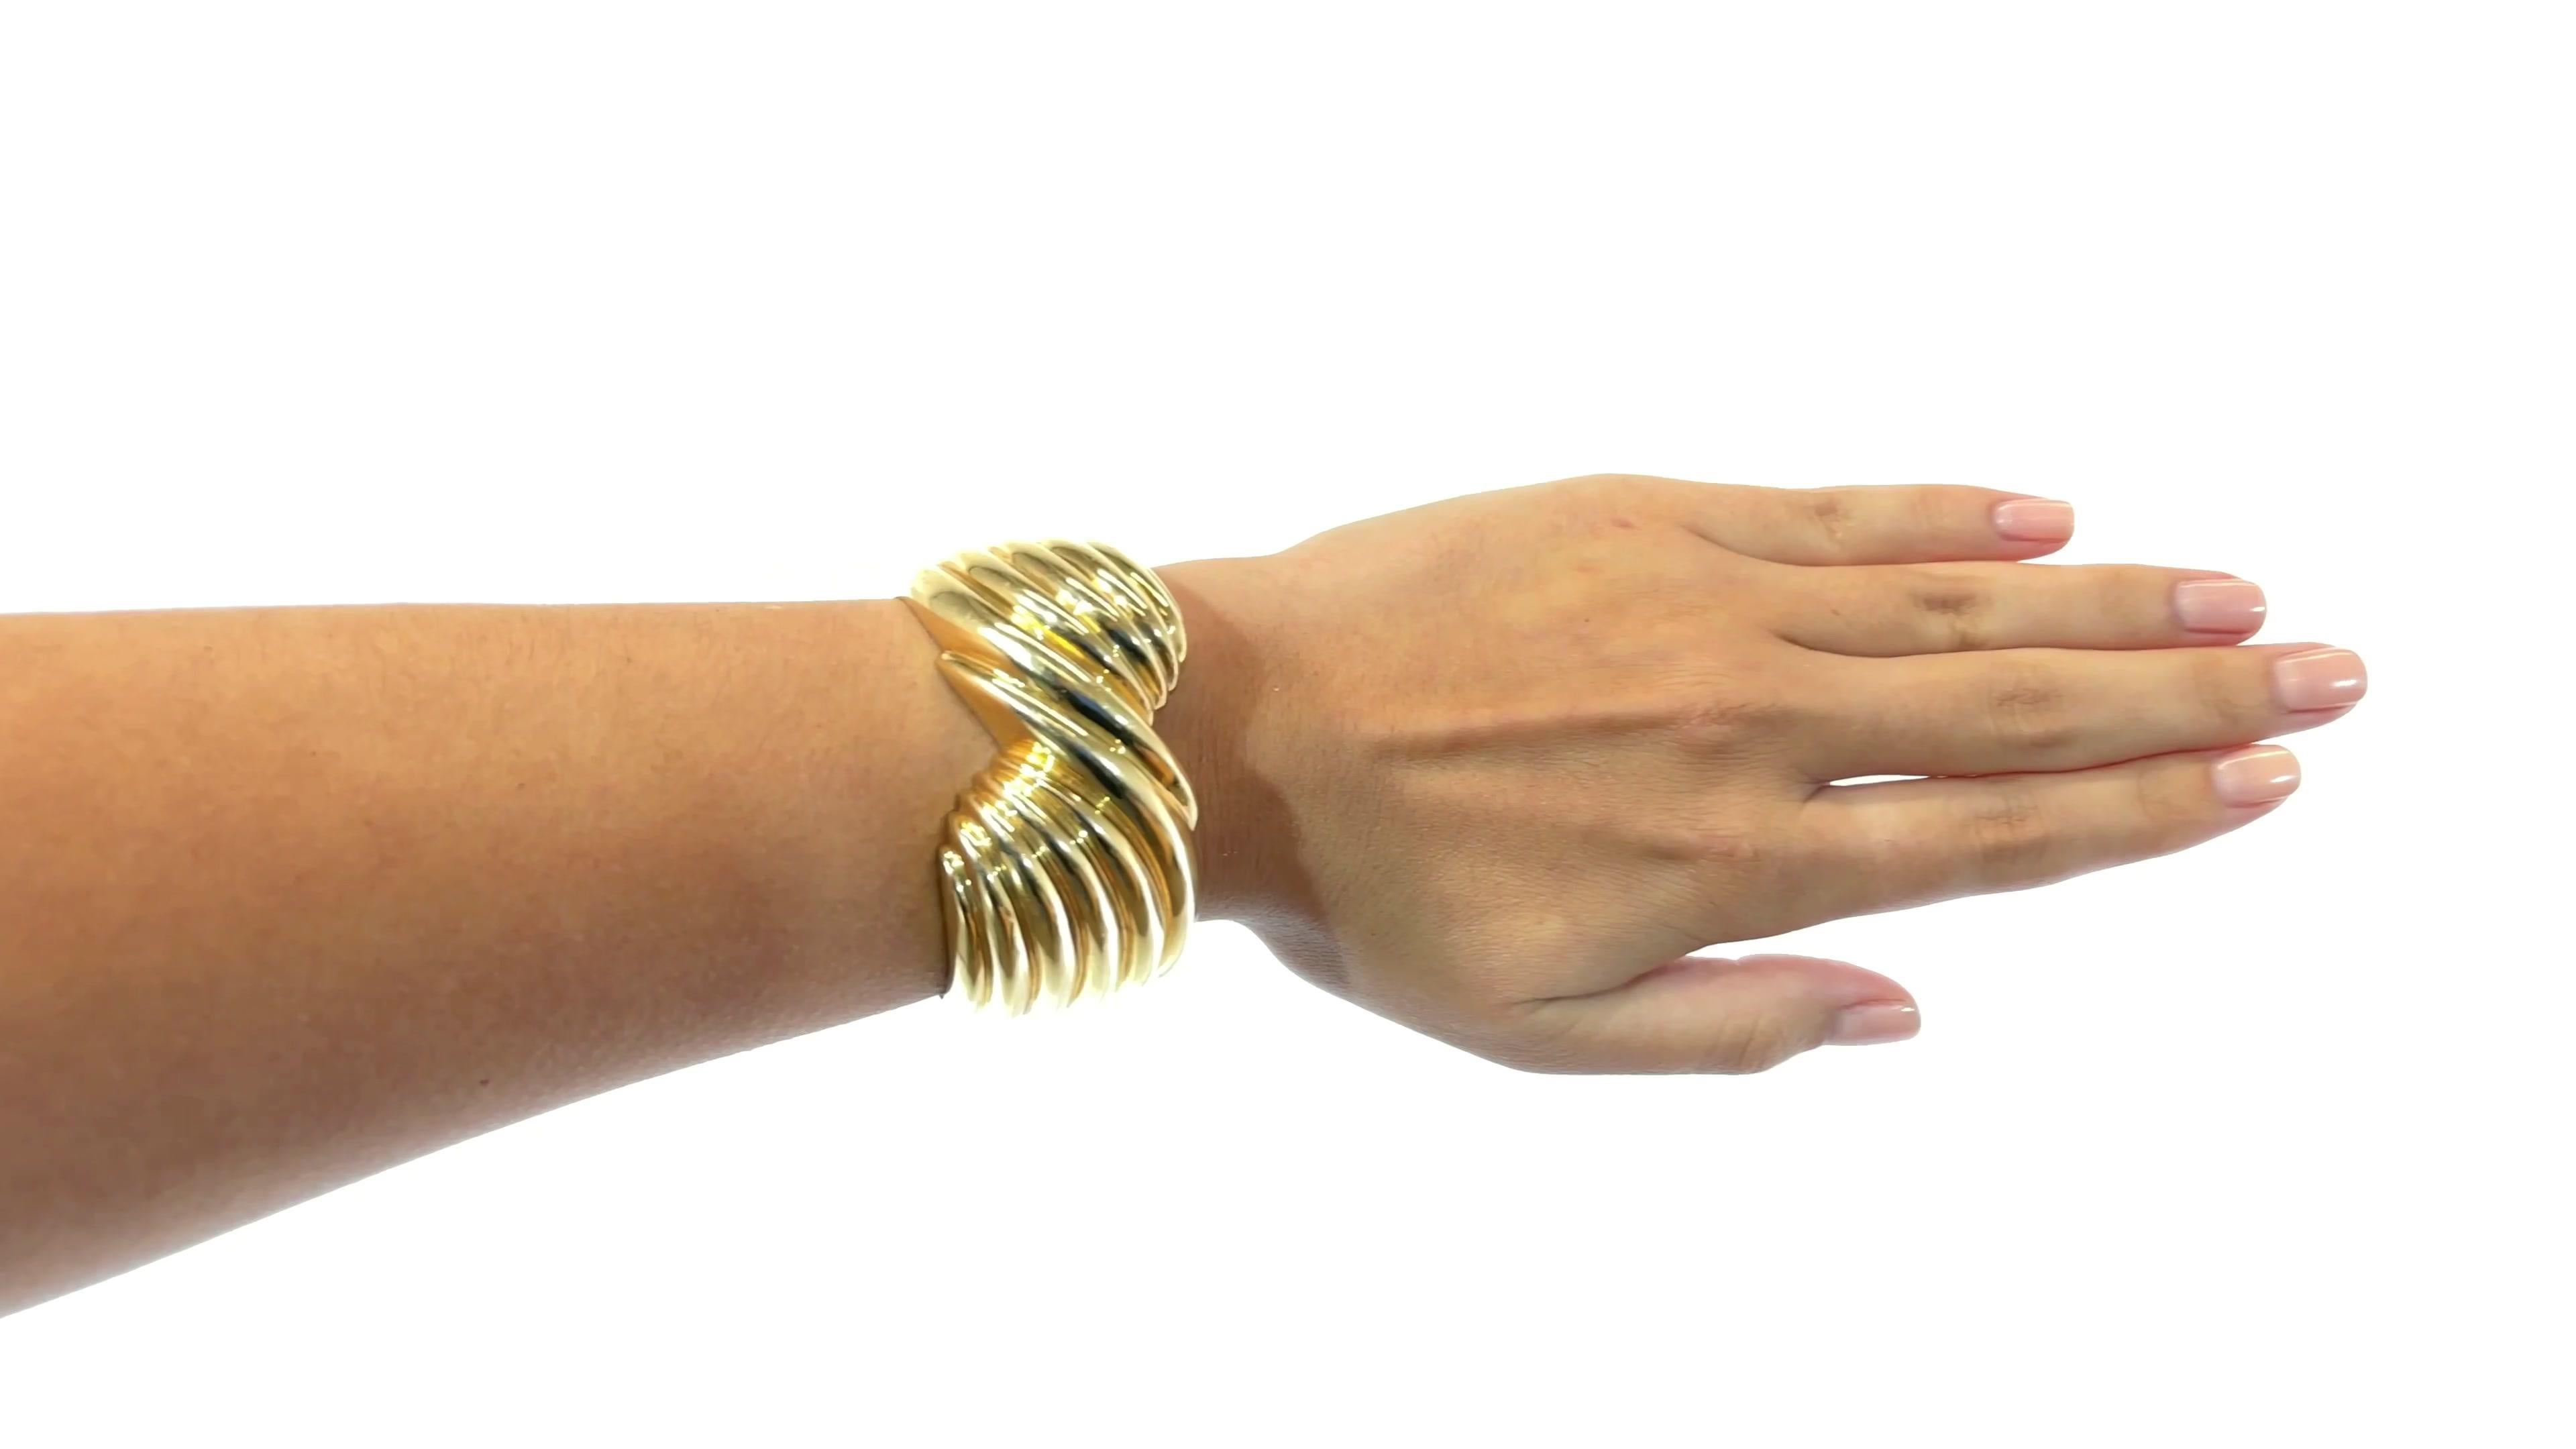 Vintage Gold Cuff Bracelet. 14k yellow gold. 77.6 grams. Circa 1980s.

About the piece: Interesting swirl designed gold bracelet. It's a very big look but easy to wear. Excellent with a black outfit for evening wear or with jeans for the farmer's